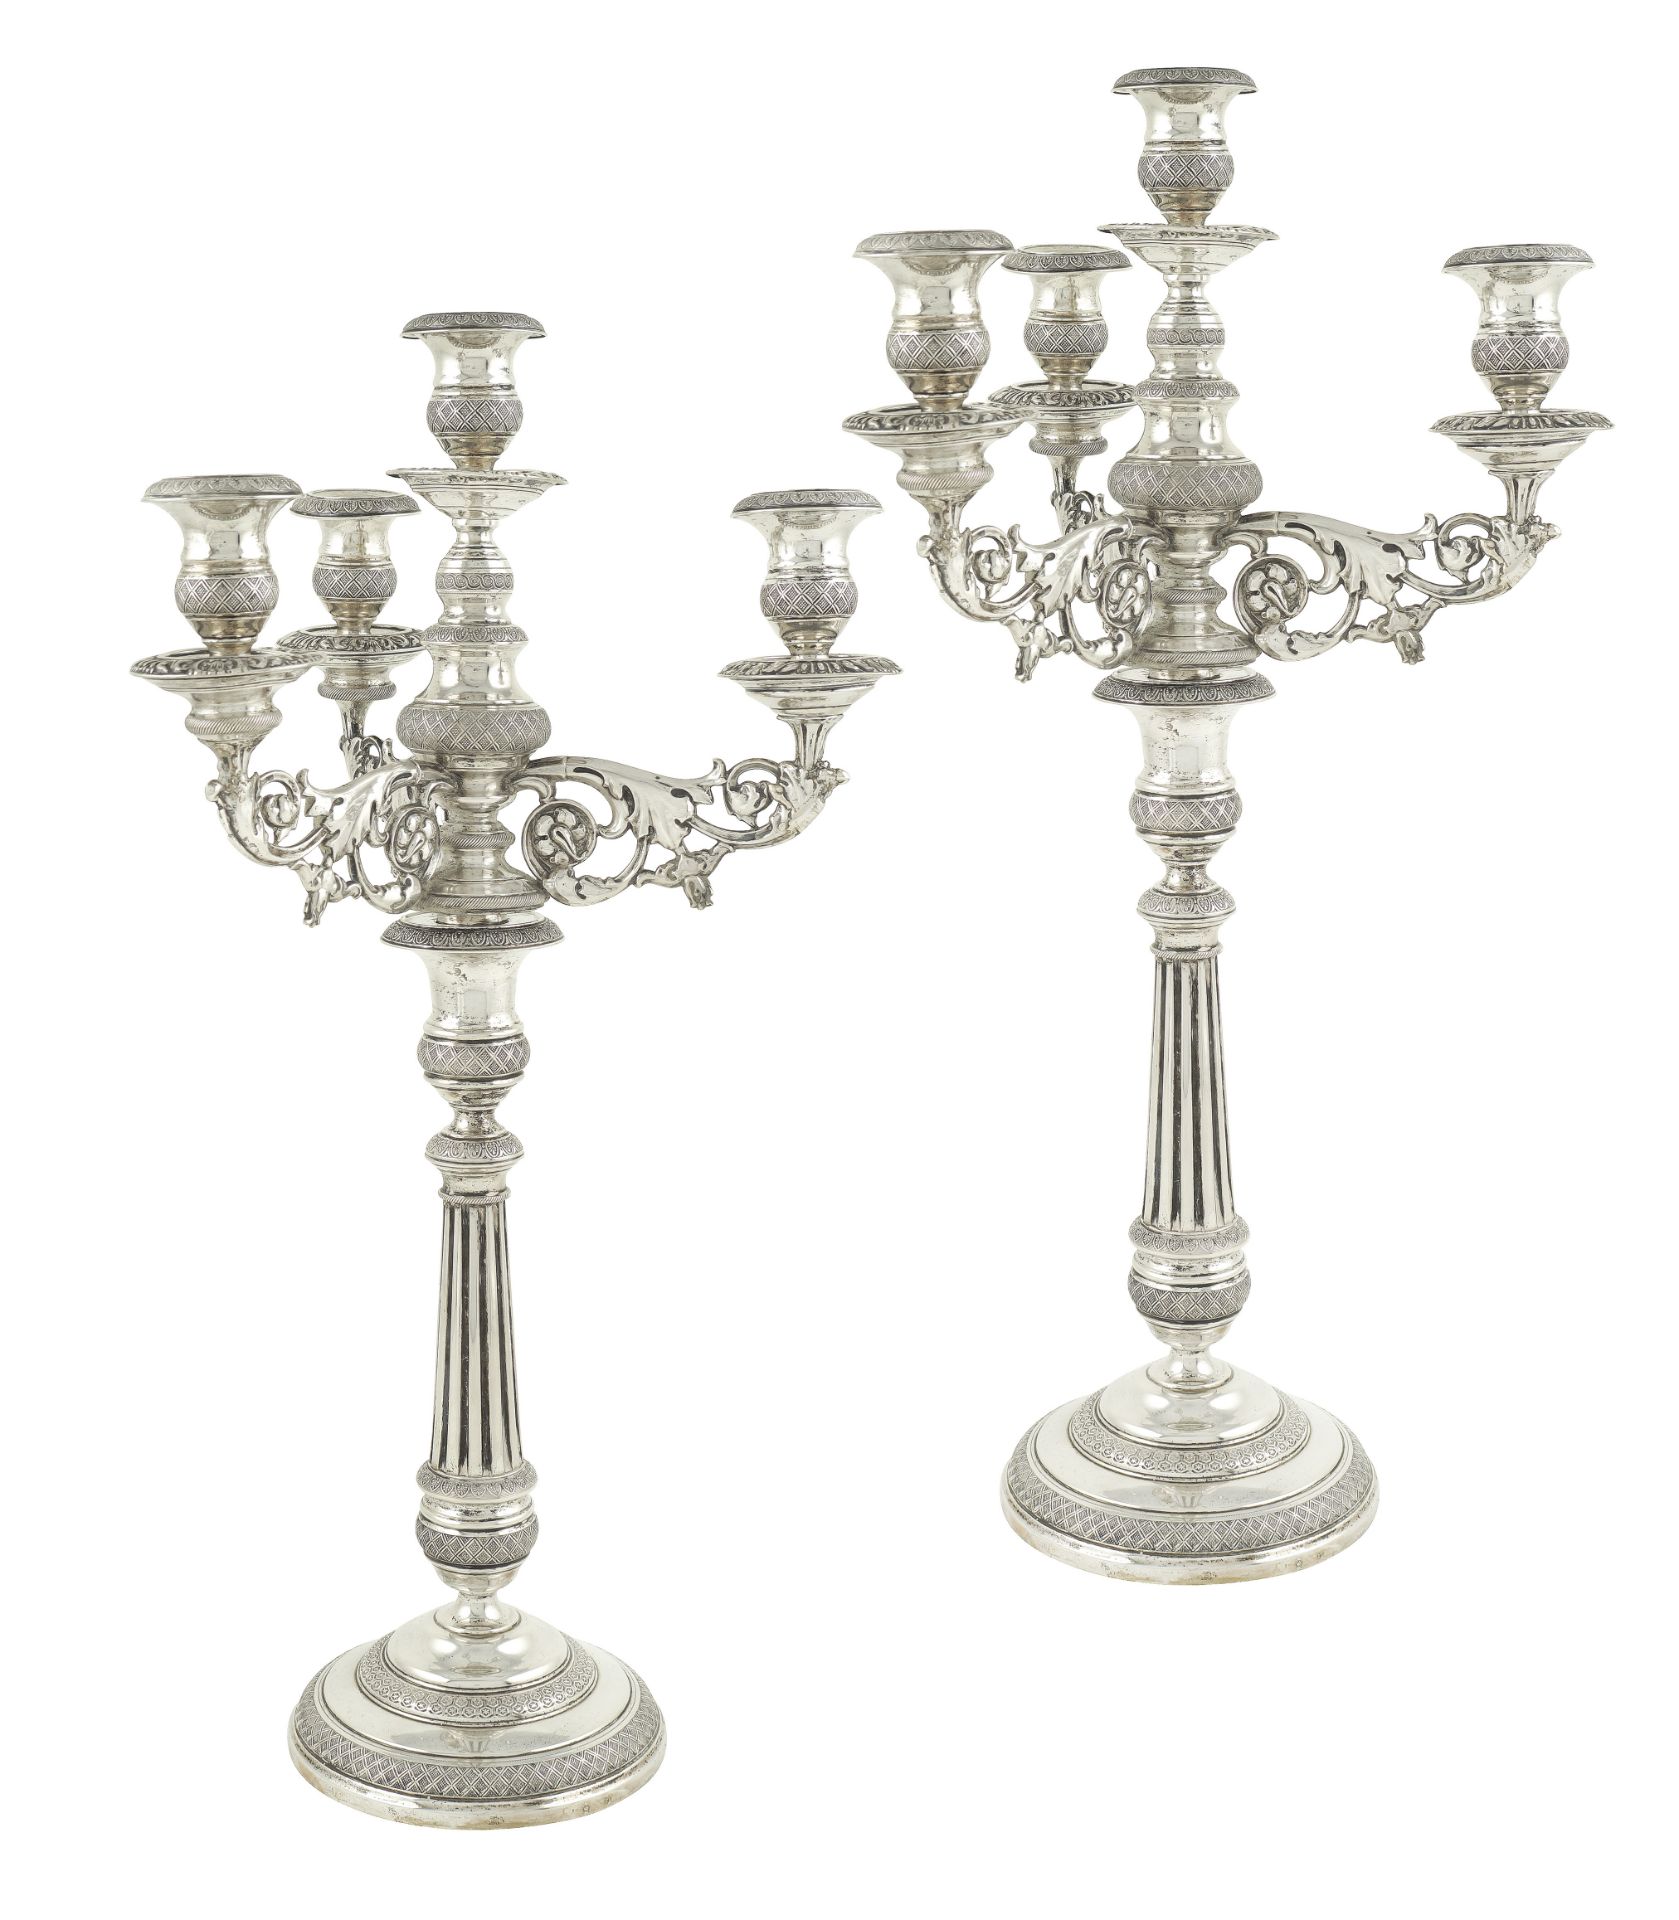 A pair of silver candelabra 4 flames Rome, first half of 19th century peso lordo 1930 gr.